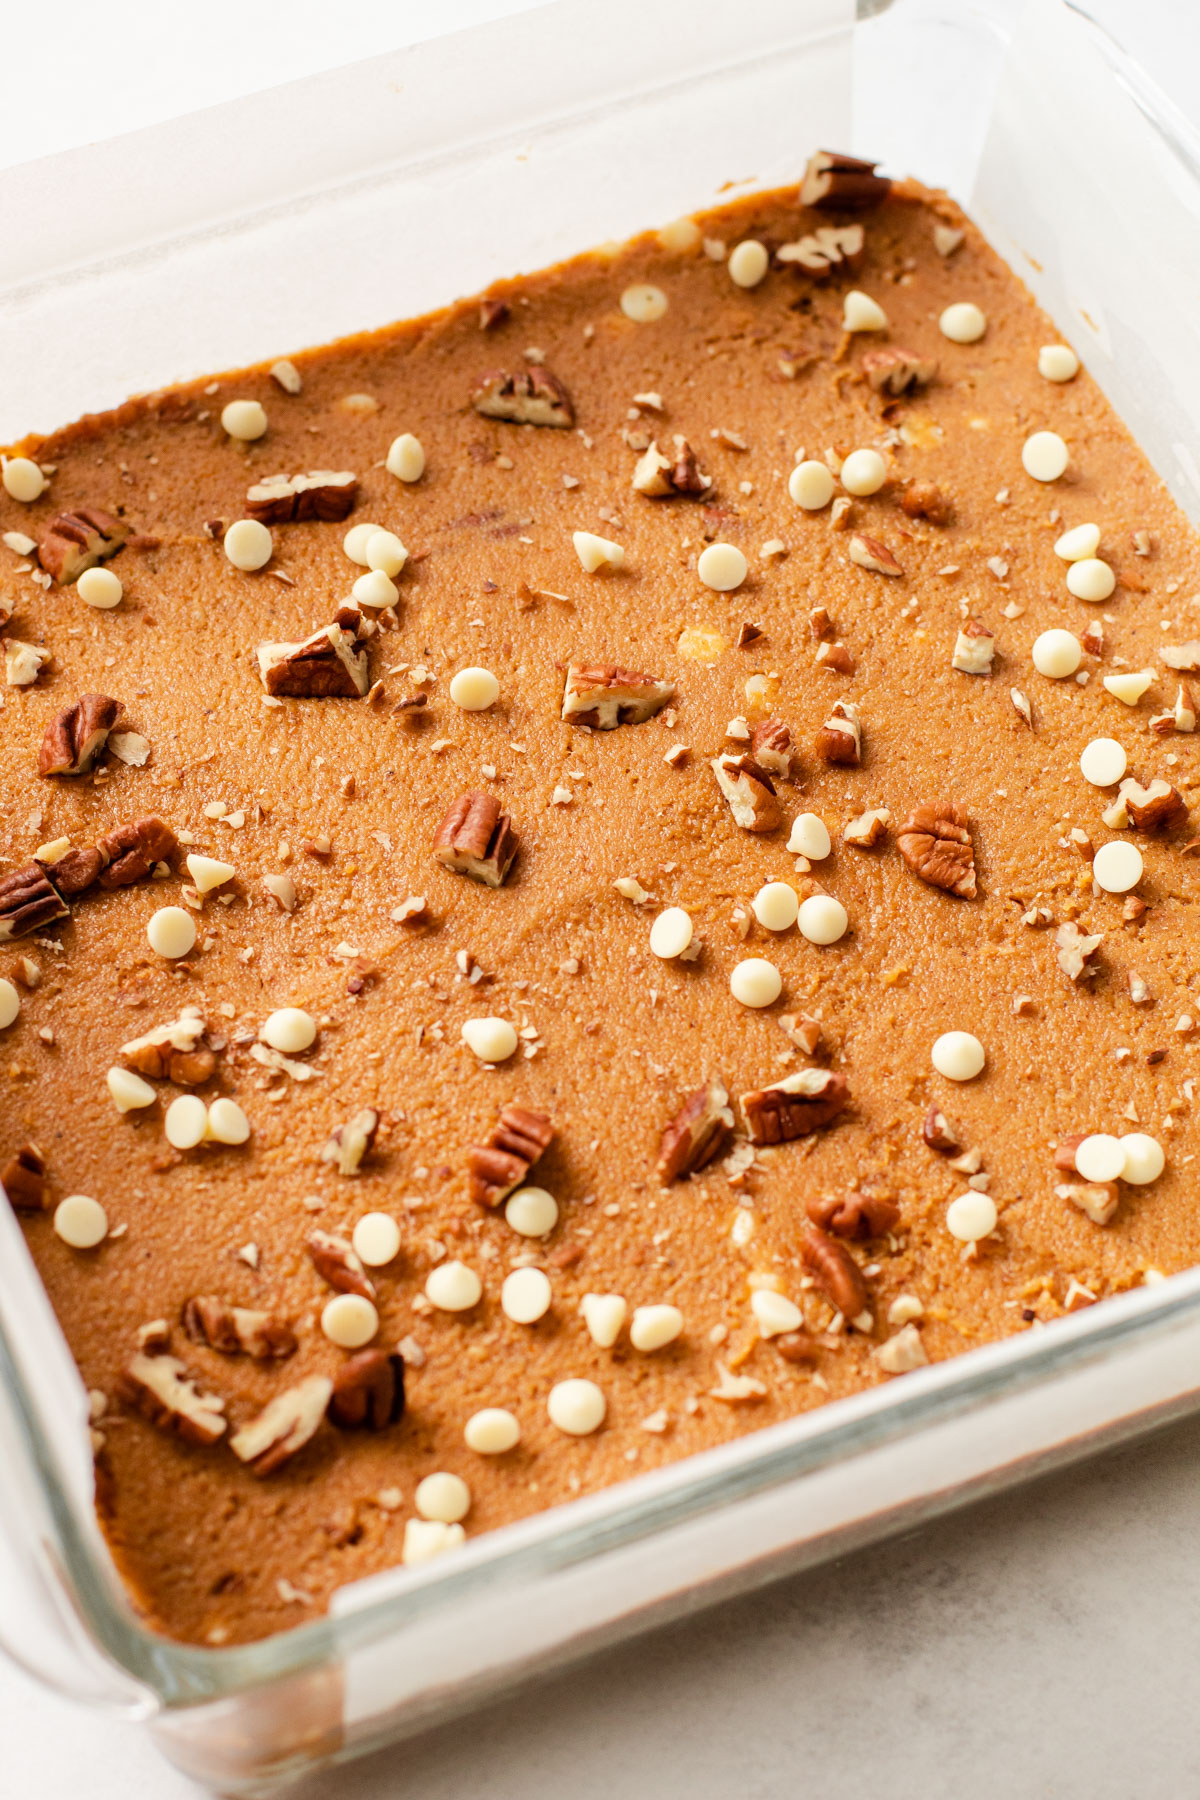 The unbaked batter of pumpkin spice blondies in a glass dish.